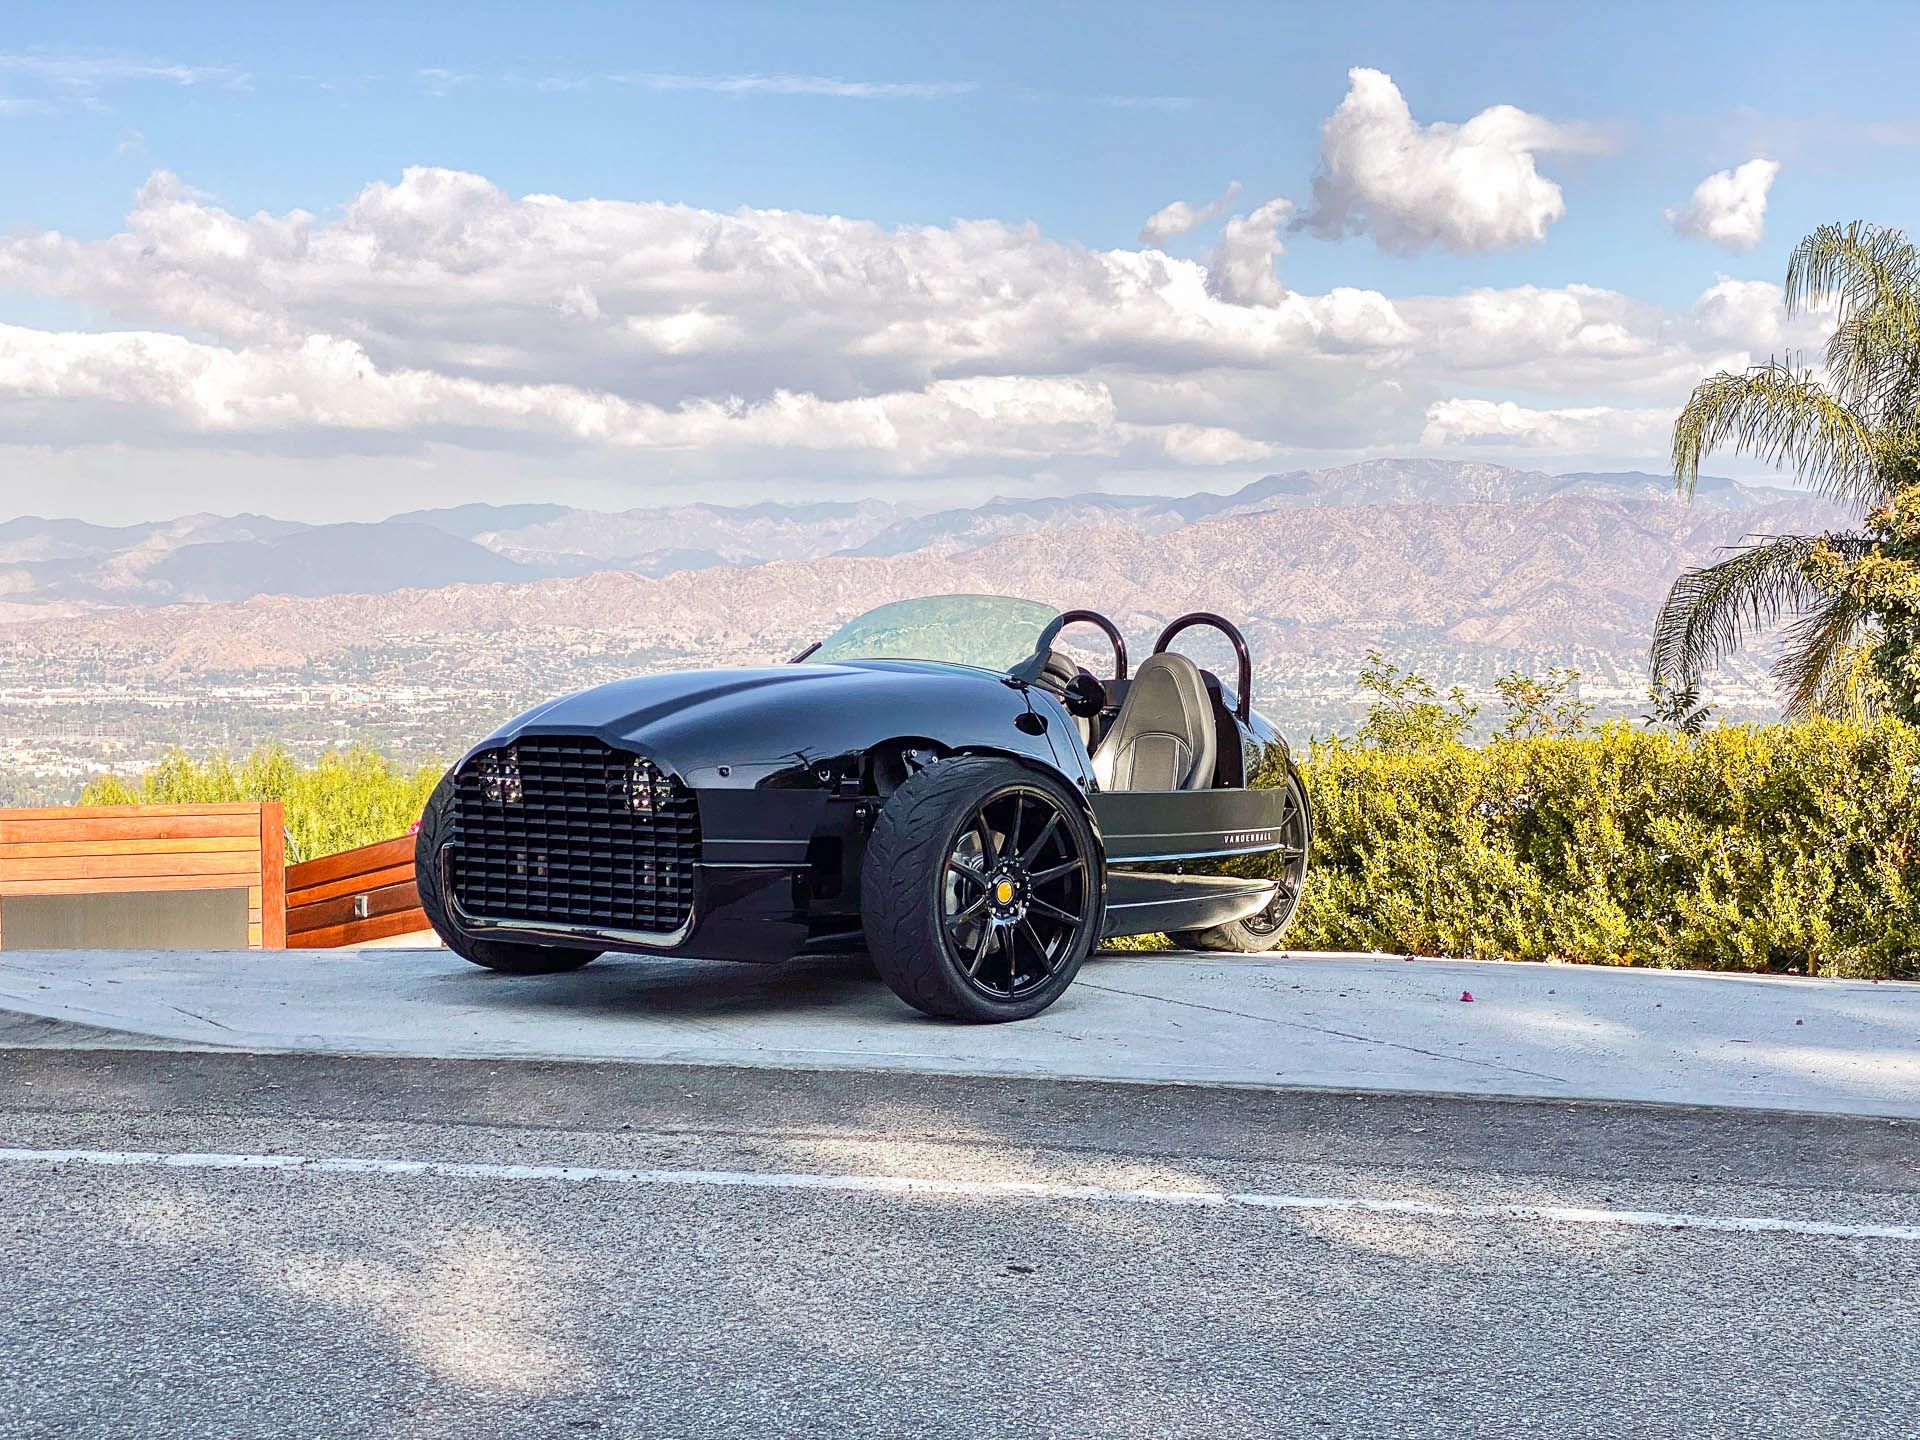 First Drive Review: The 2020 Vanderhall Edison Three Wheeler Is A